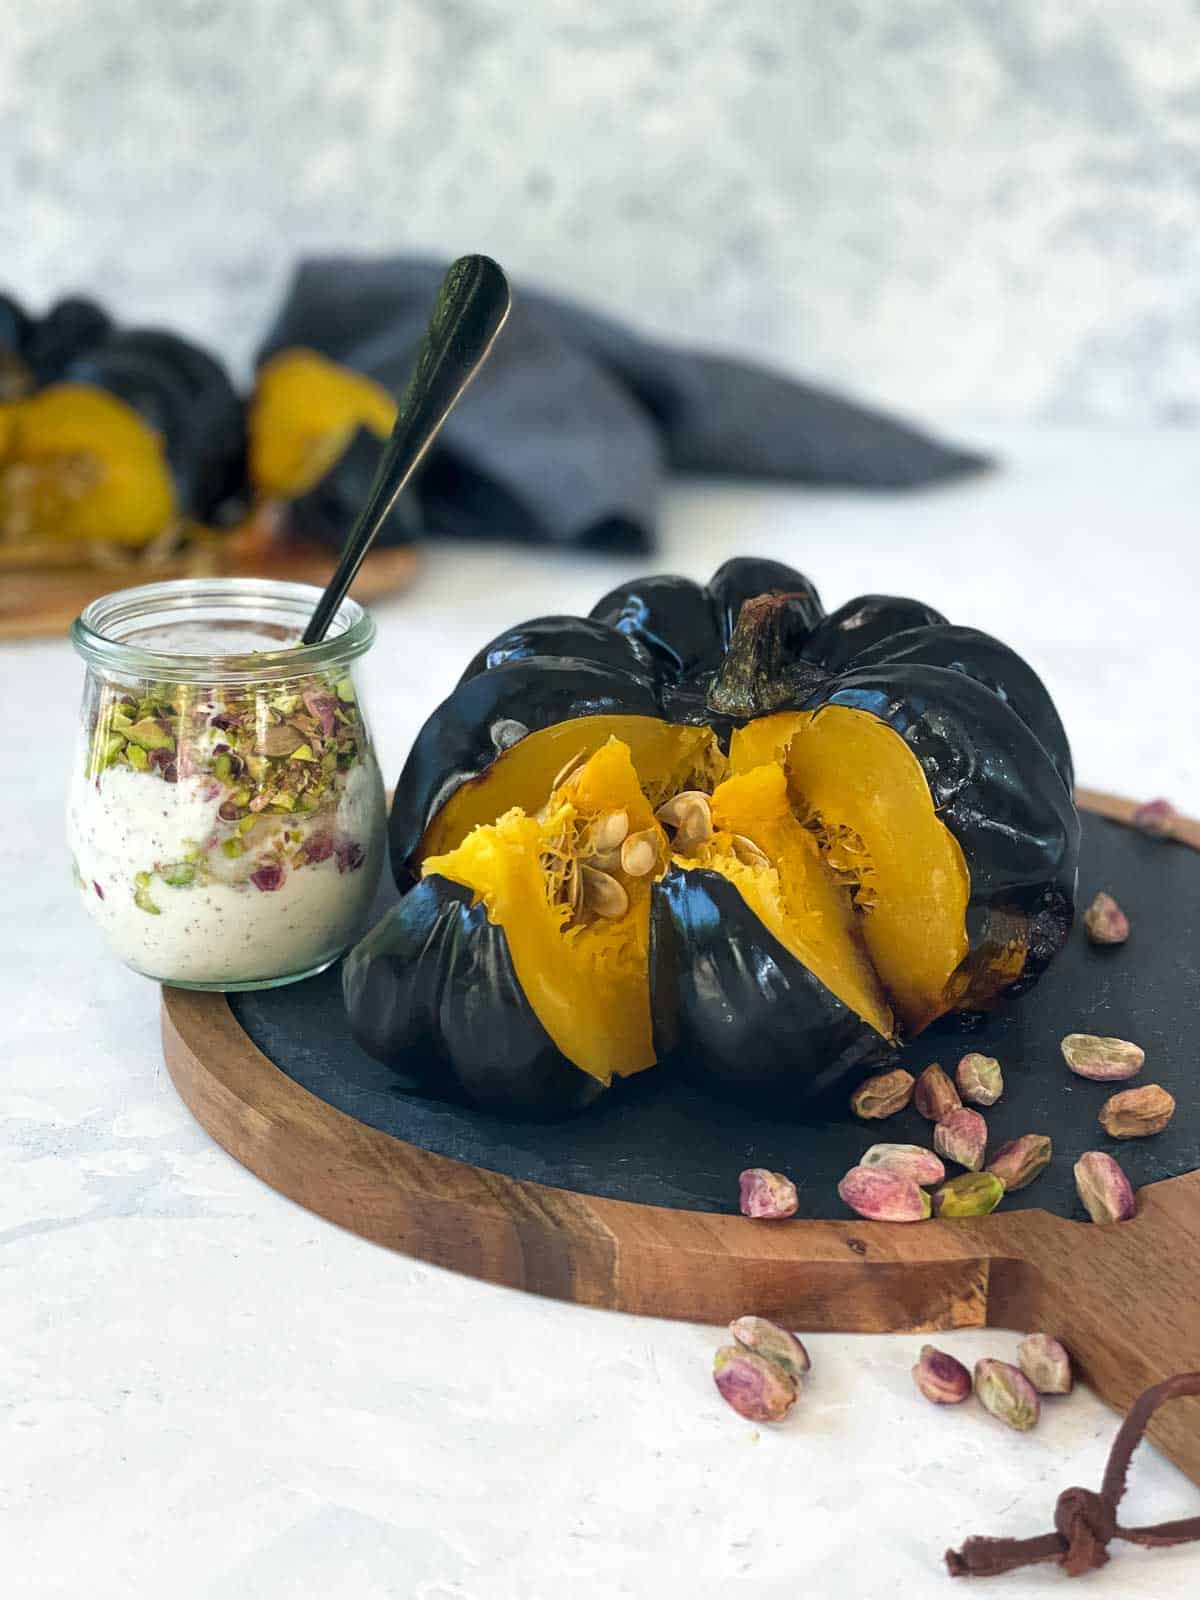 Whole Roasted Heirloom Pumpkin on a wooden board with yoghurt dressing on the side